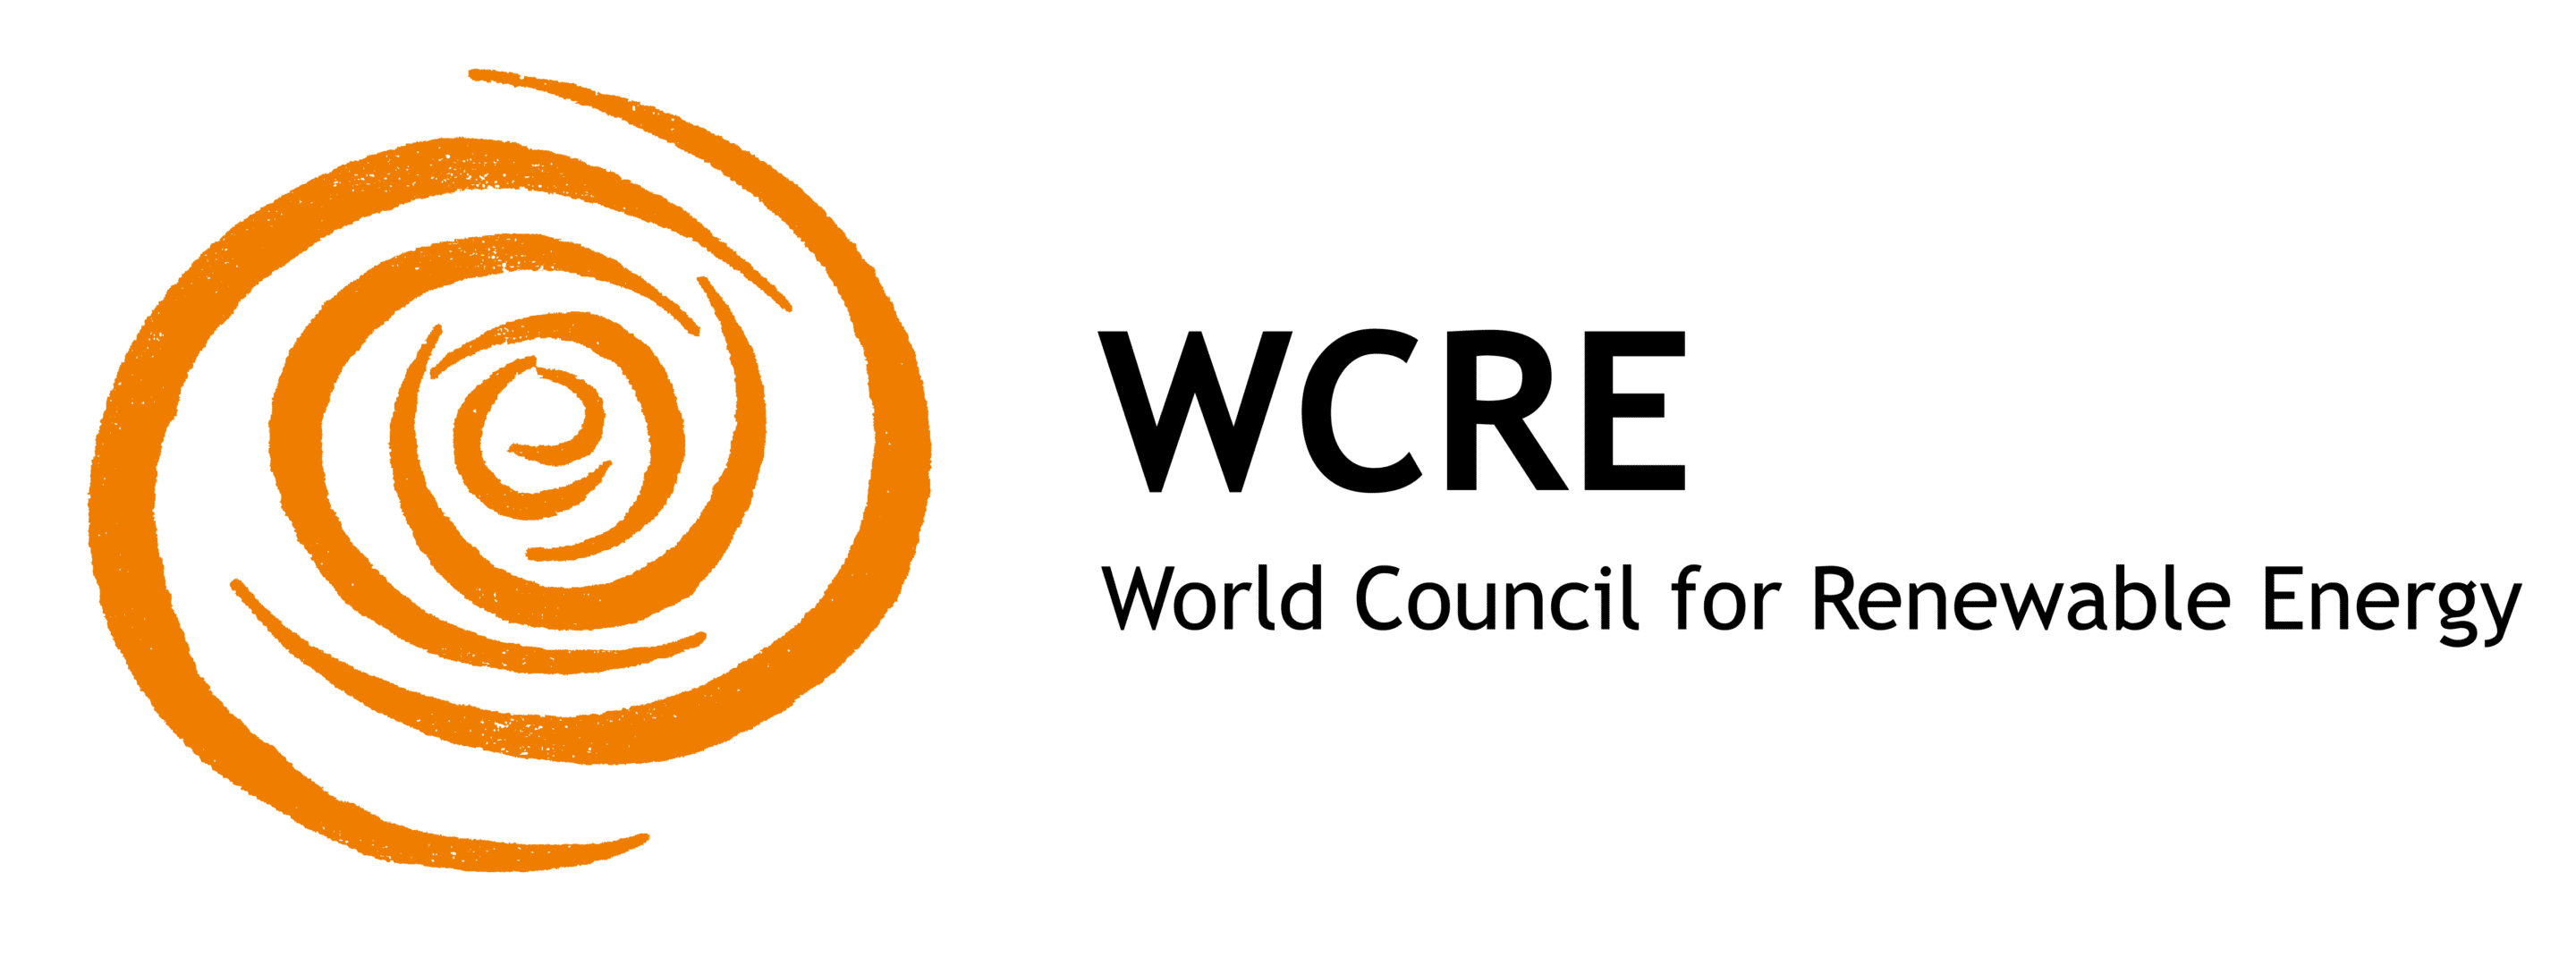 World Council for Renewable Energy